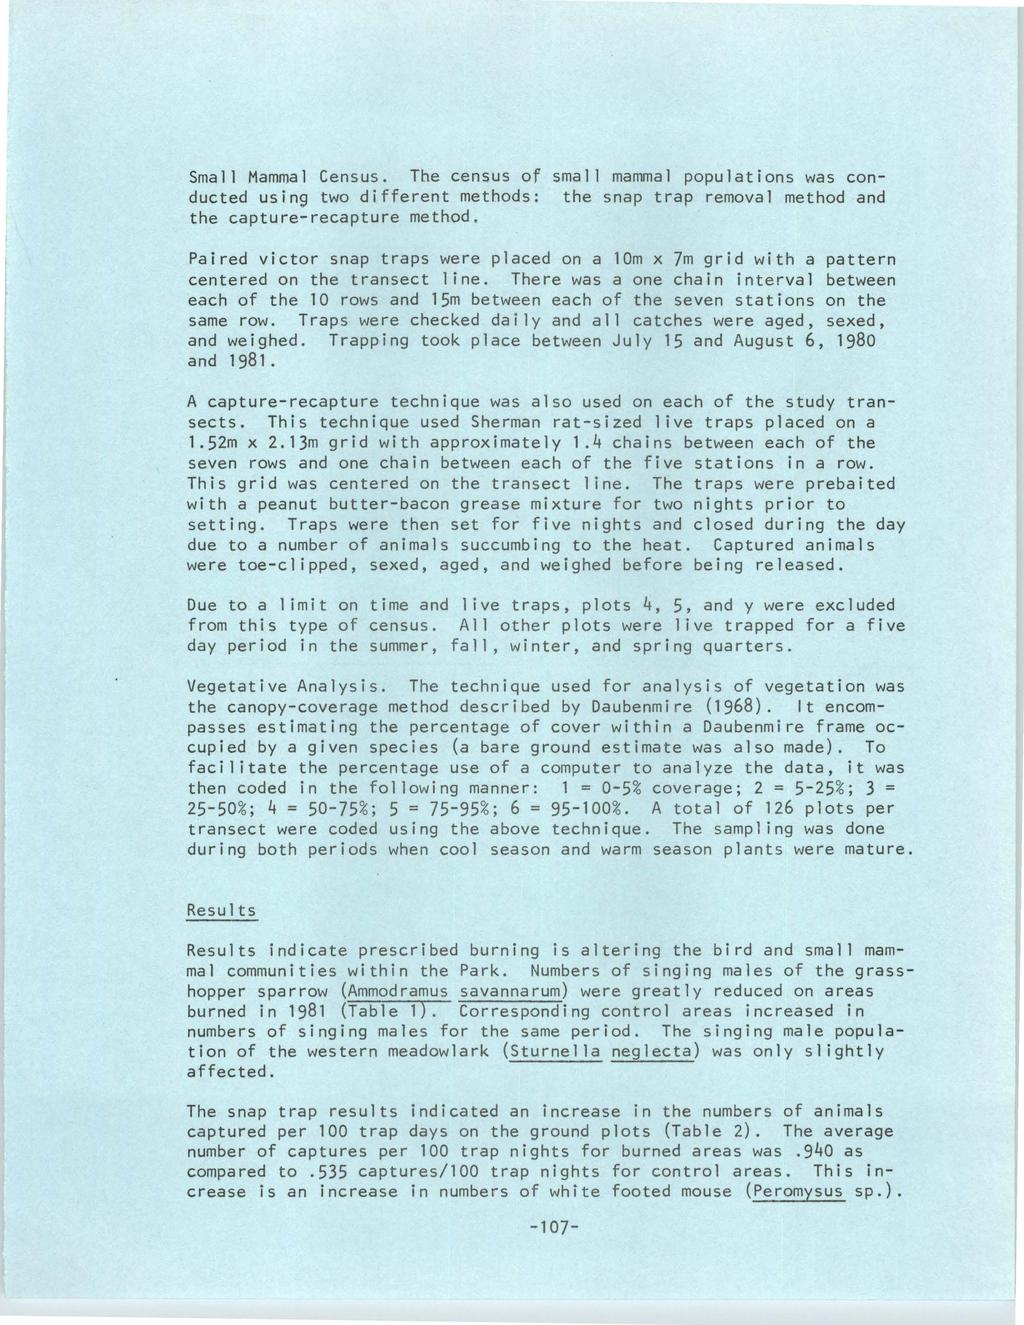 University of Wyoming National Park Service Research Center Annual Report, Vol. 5 [1981], Art. 18 Small Mammal Census.